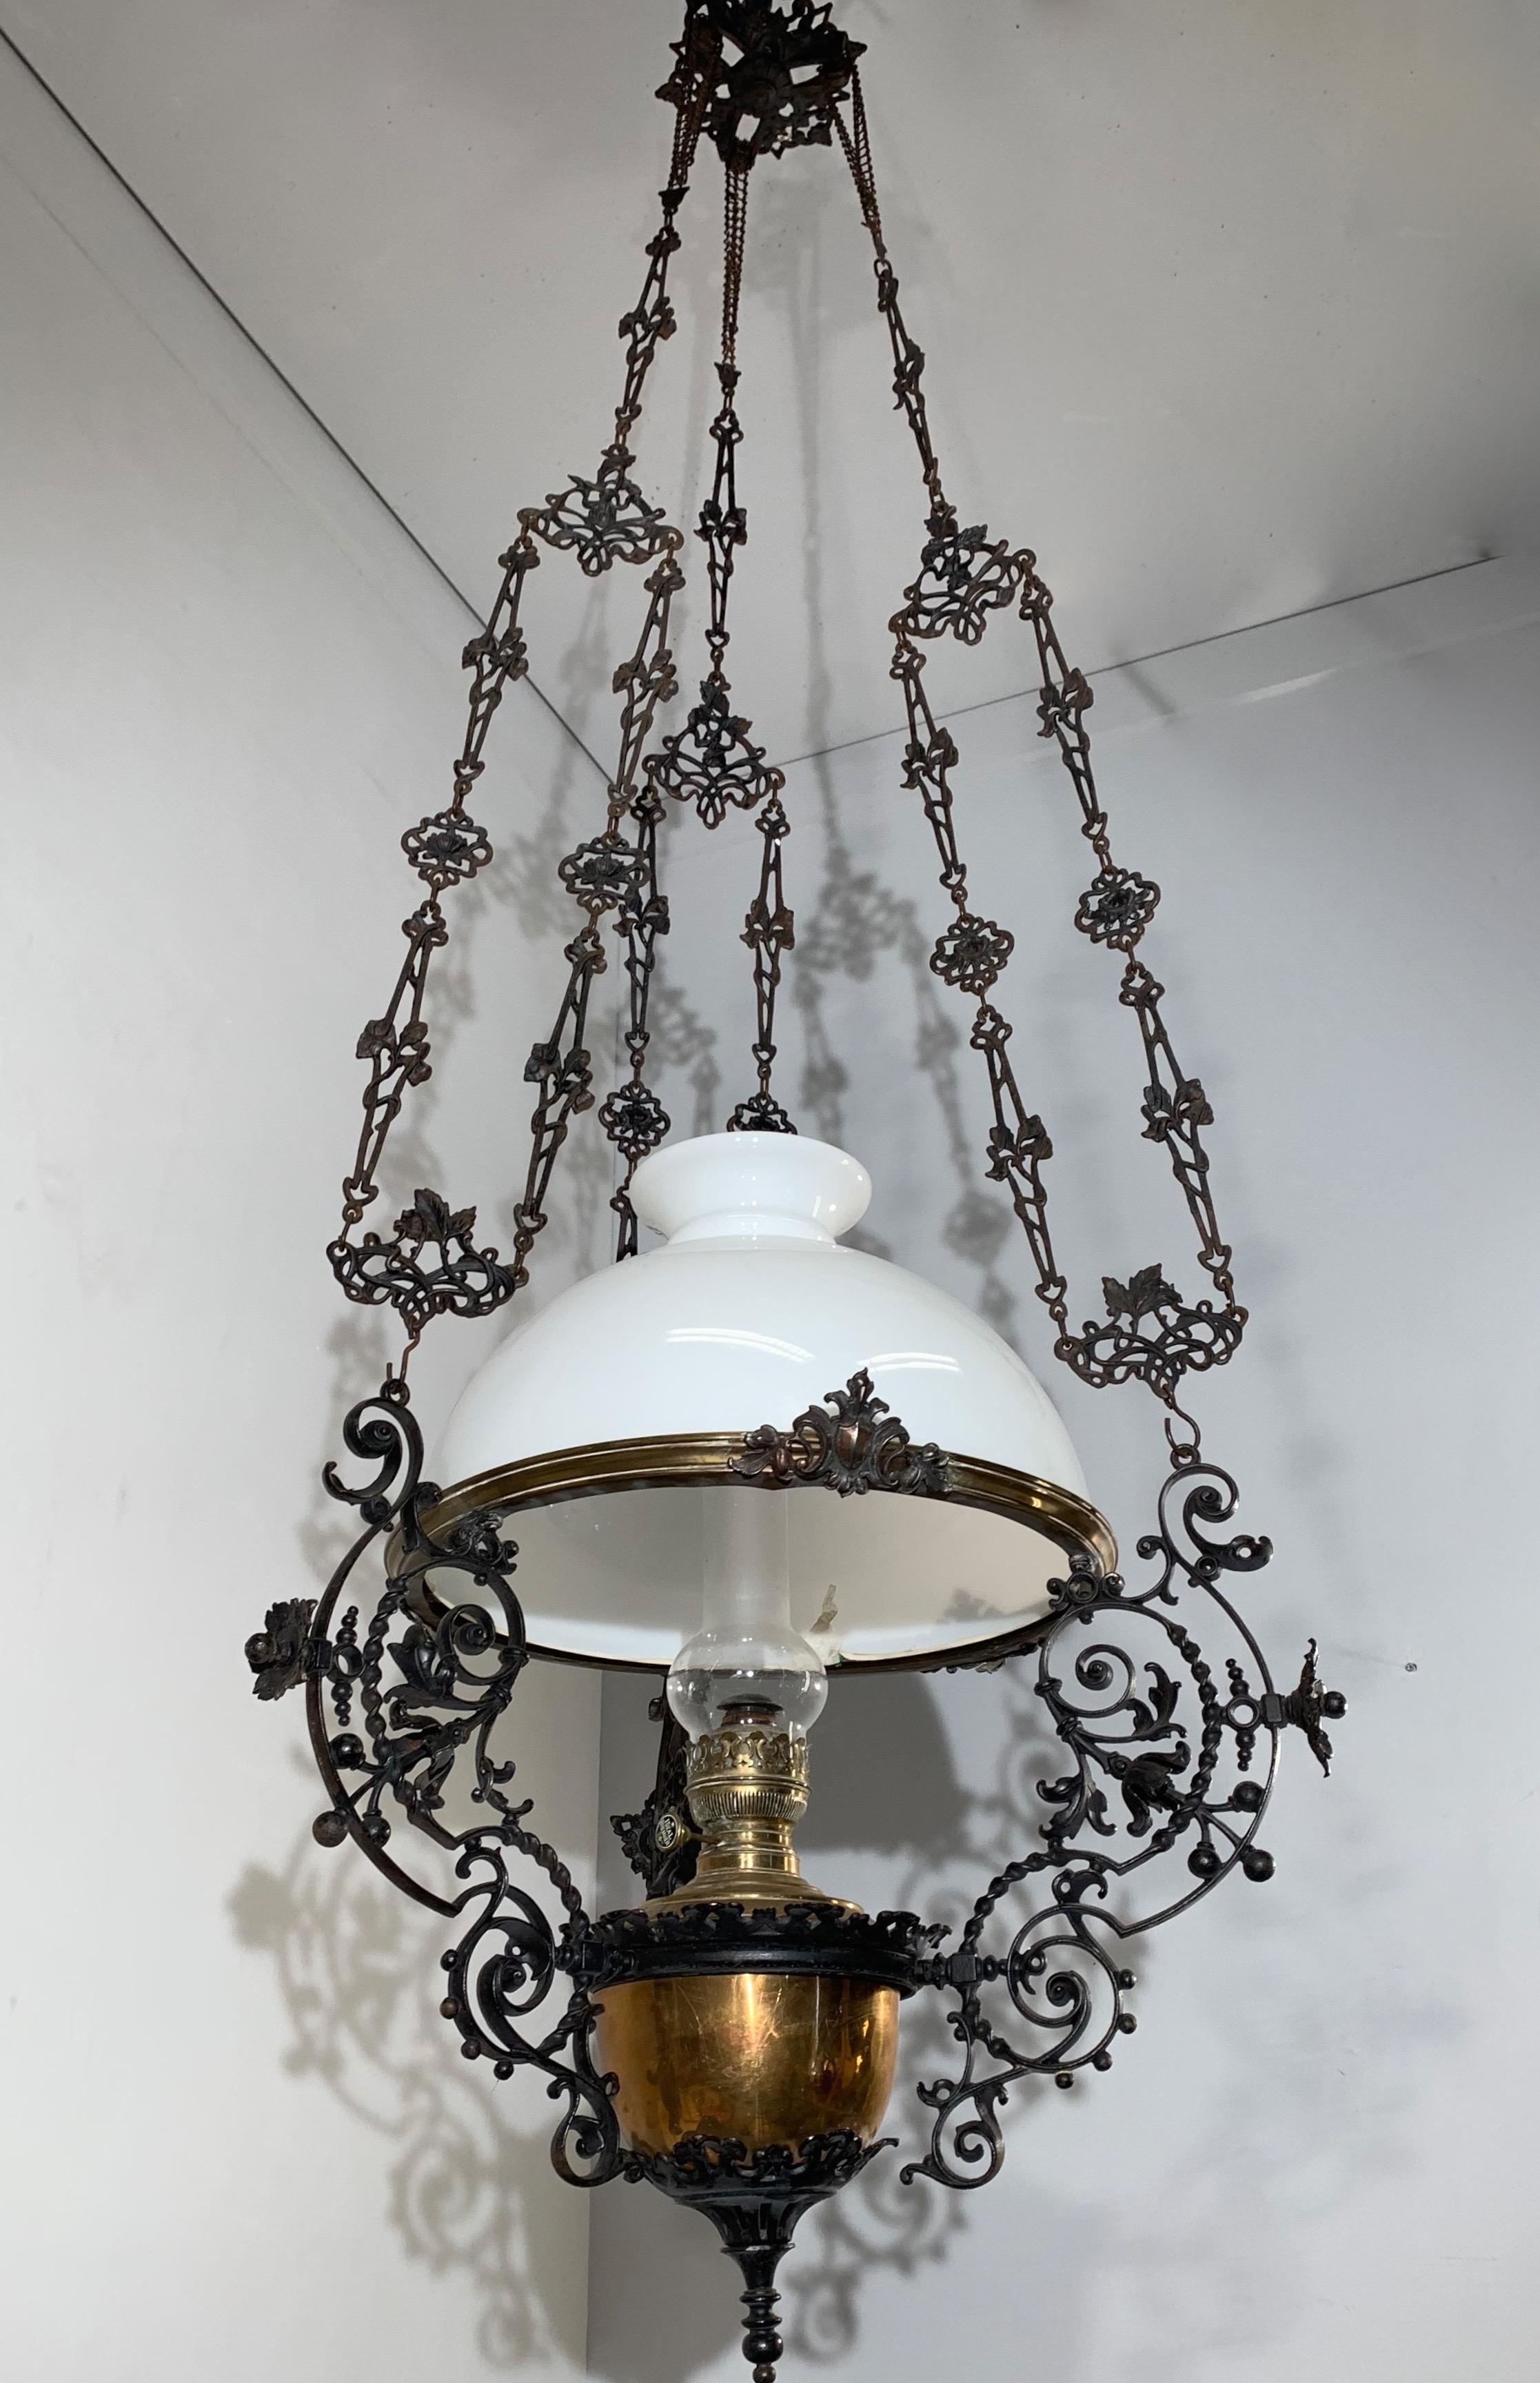 Rare and large antique oil lamp with blackened iron frame.

This large and impressive oil lamp dates from the early 1900s. It is made of different, quality materials and expensive techniques which is one of the reasons why this handcrafted antique